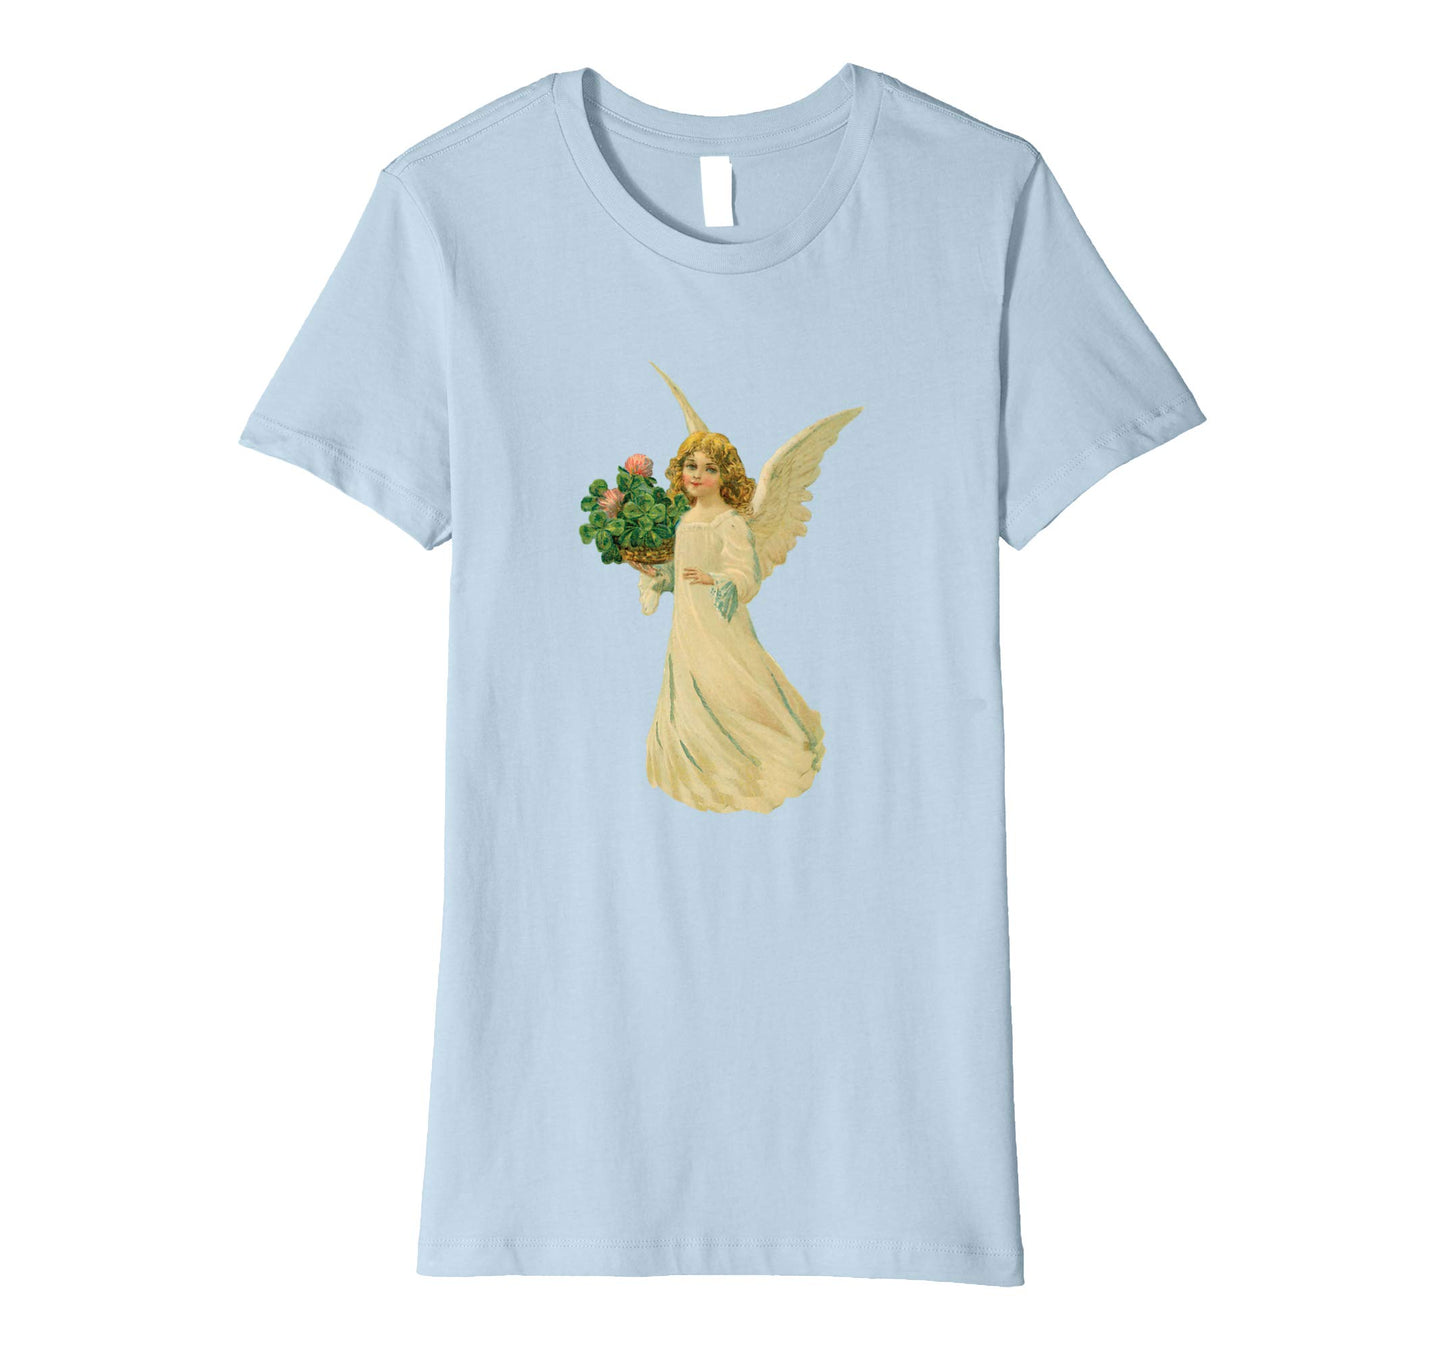 Womens Cotton Tee T-shirt Gift for Mom with Angel and Clover Art Baby Blue